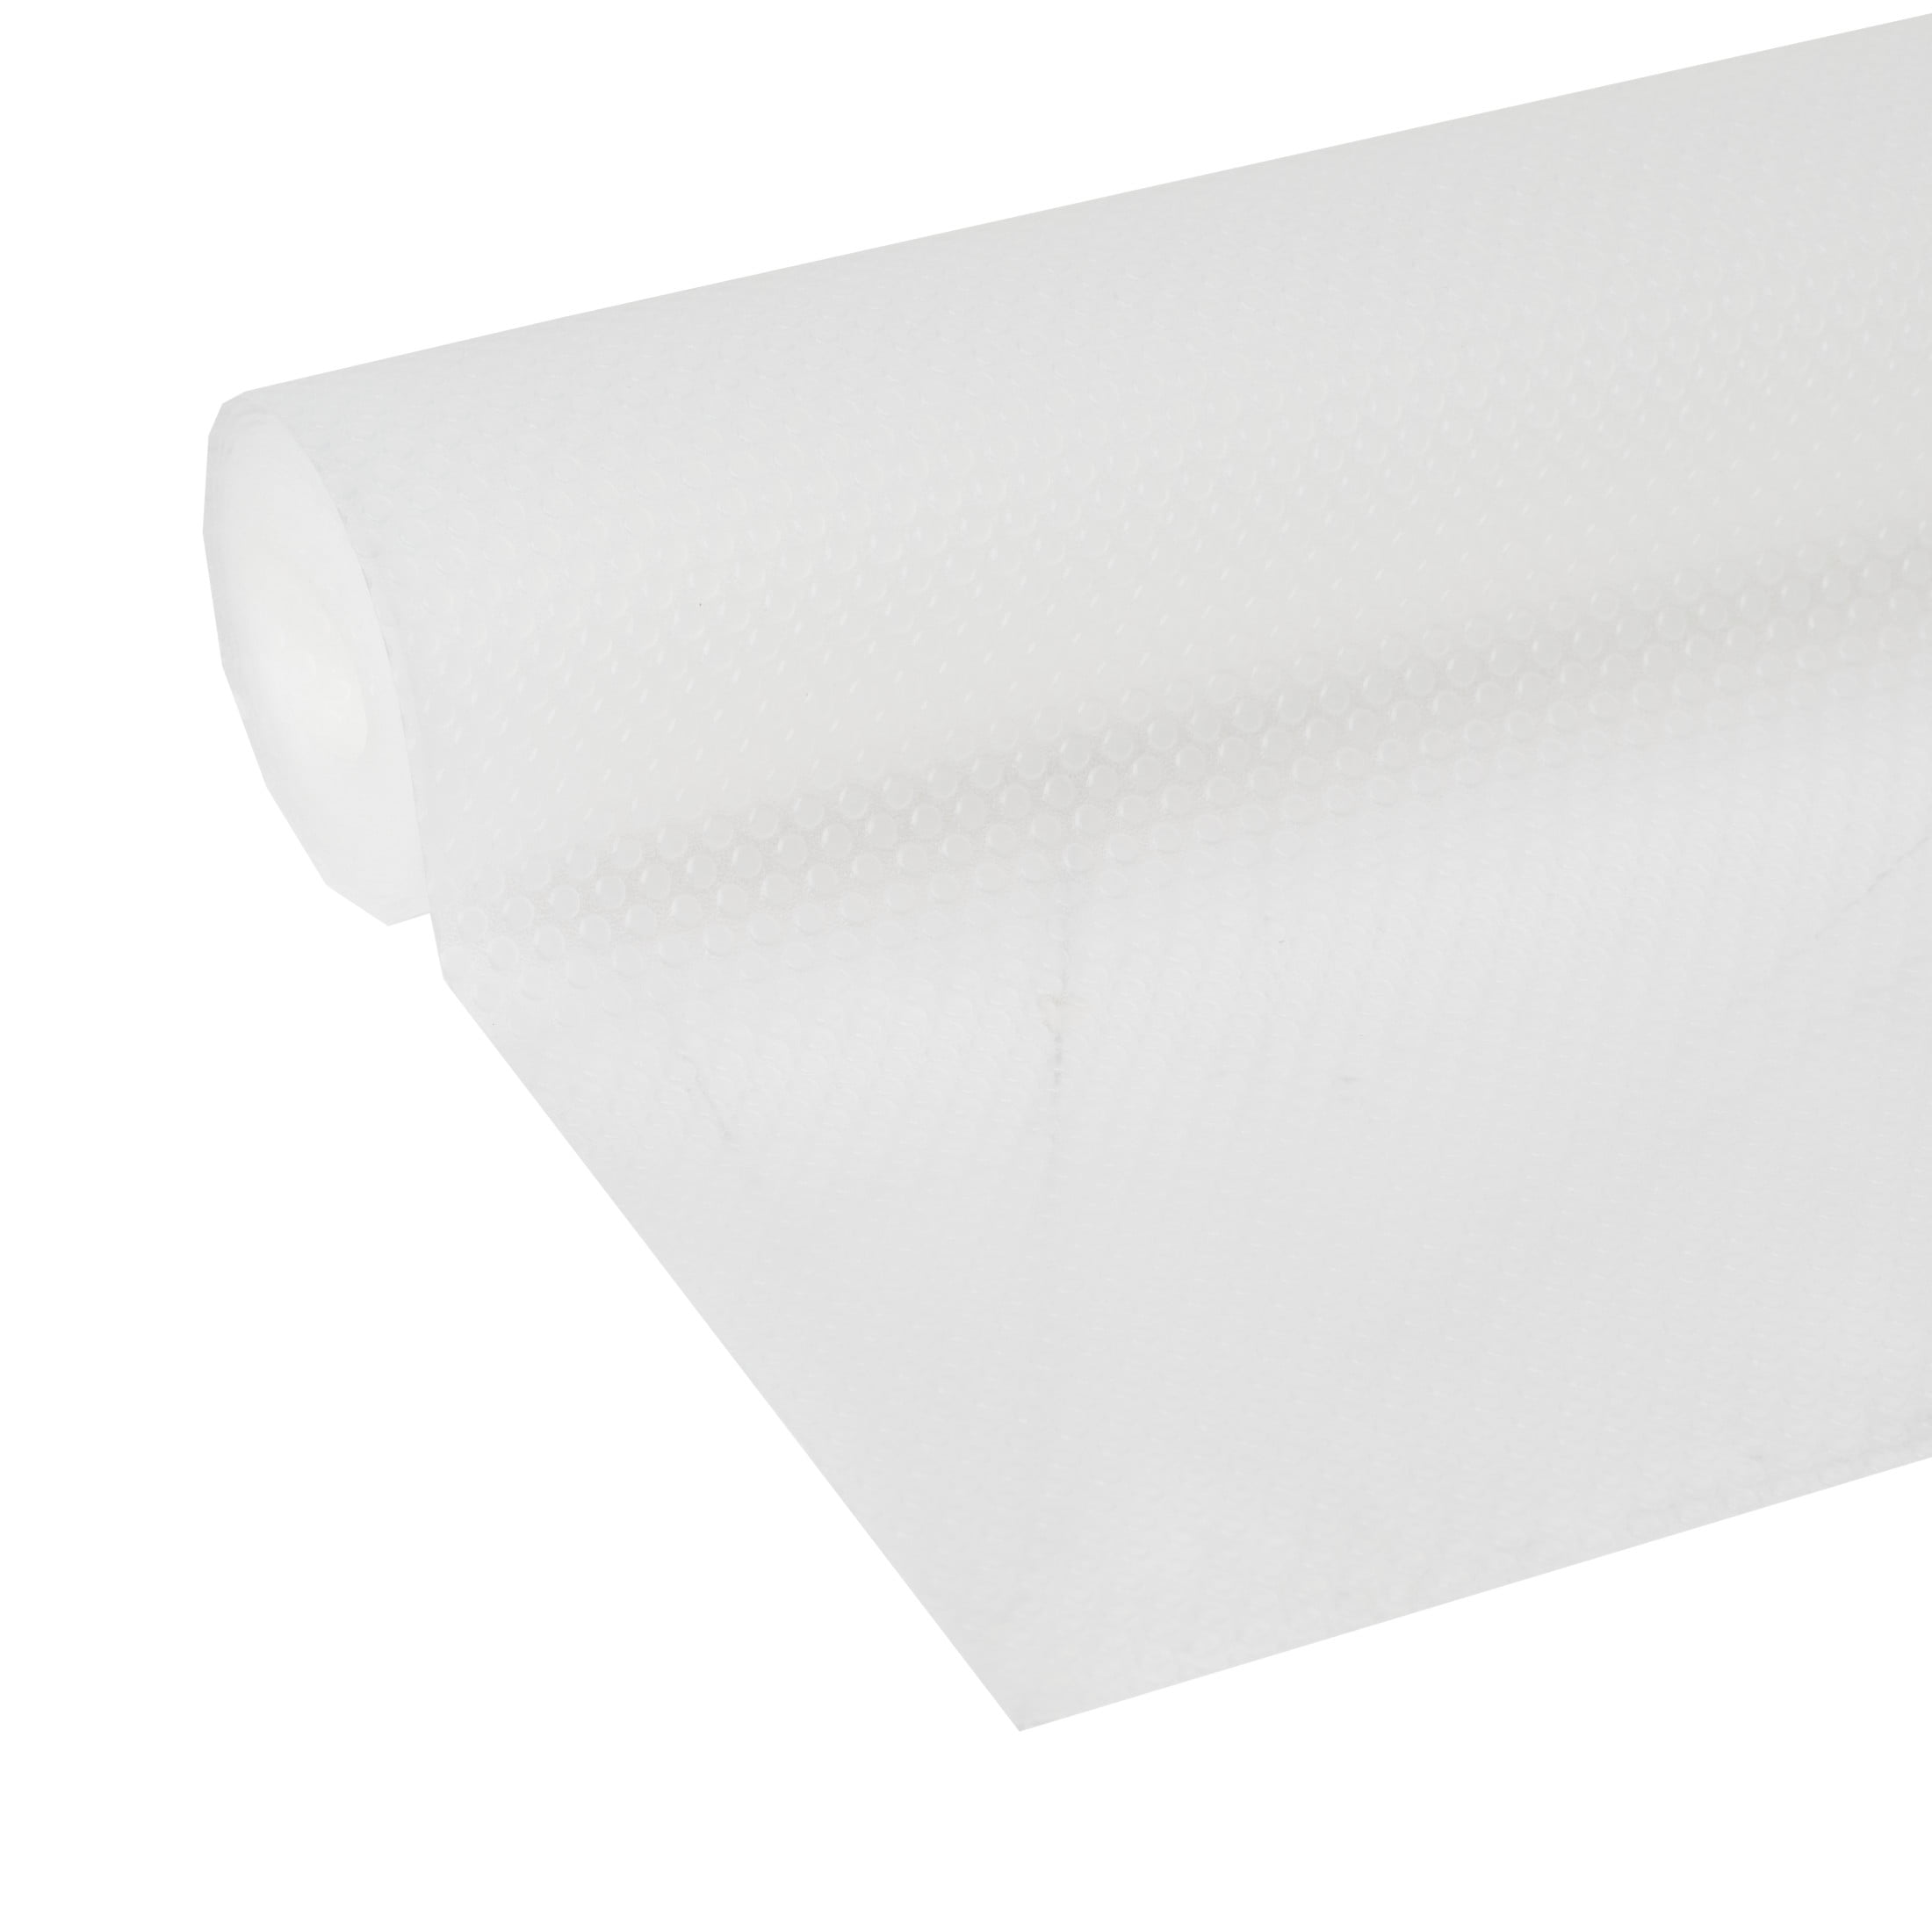 Glomen Shelf Liners 12 Inches x 20 ft - Set of 4 Clear